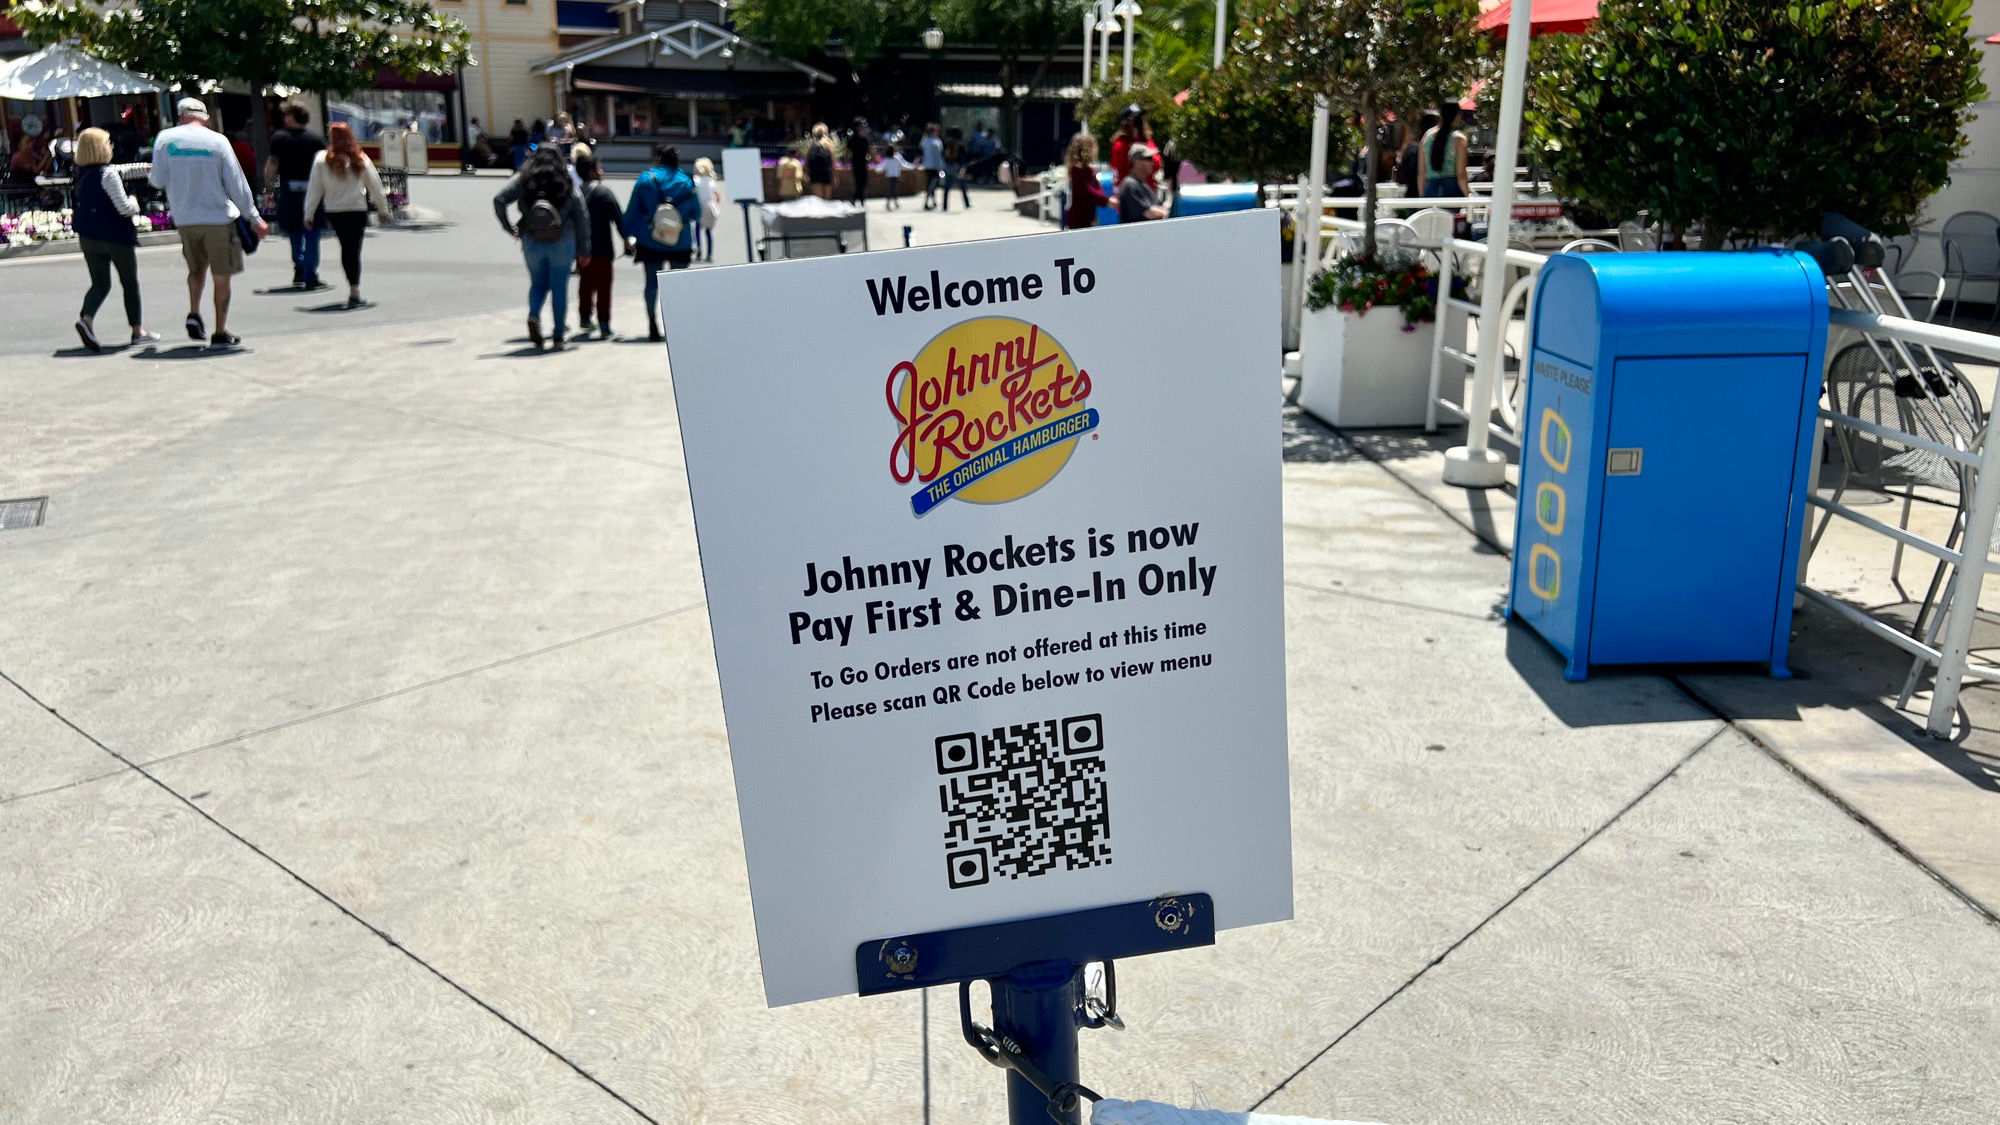 Johnny Rockets Pay First & Dine-In Only